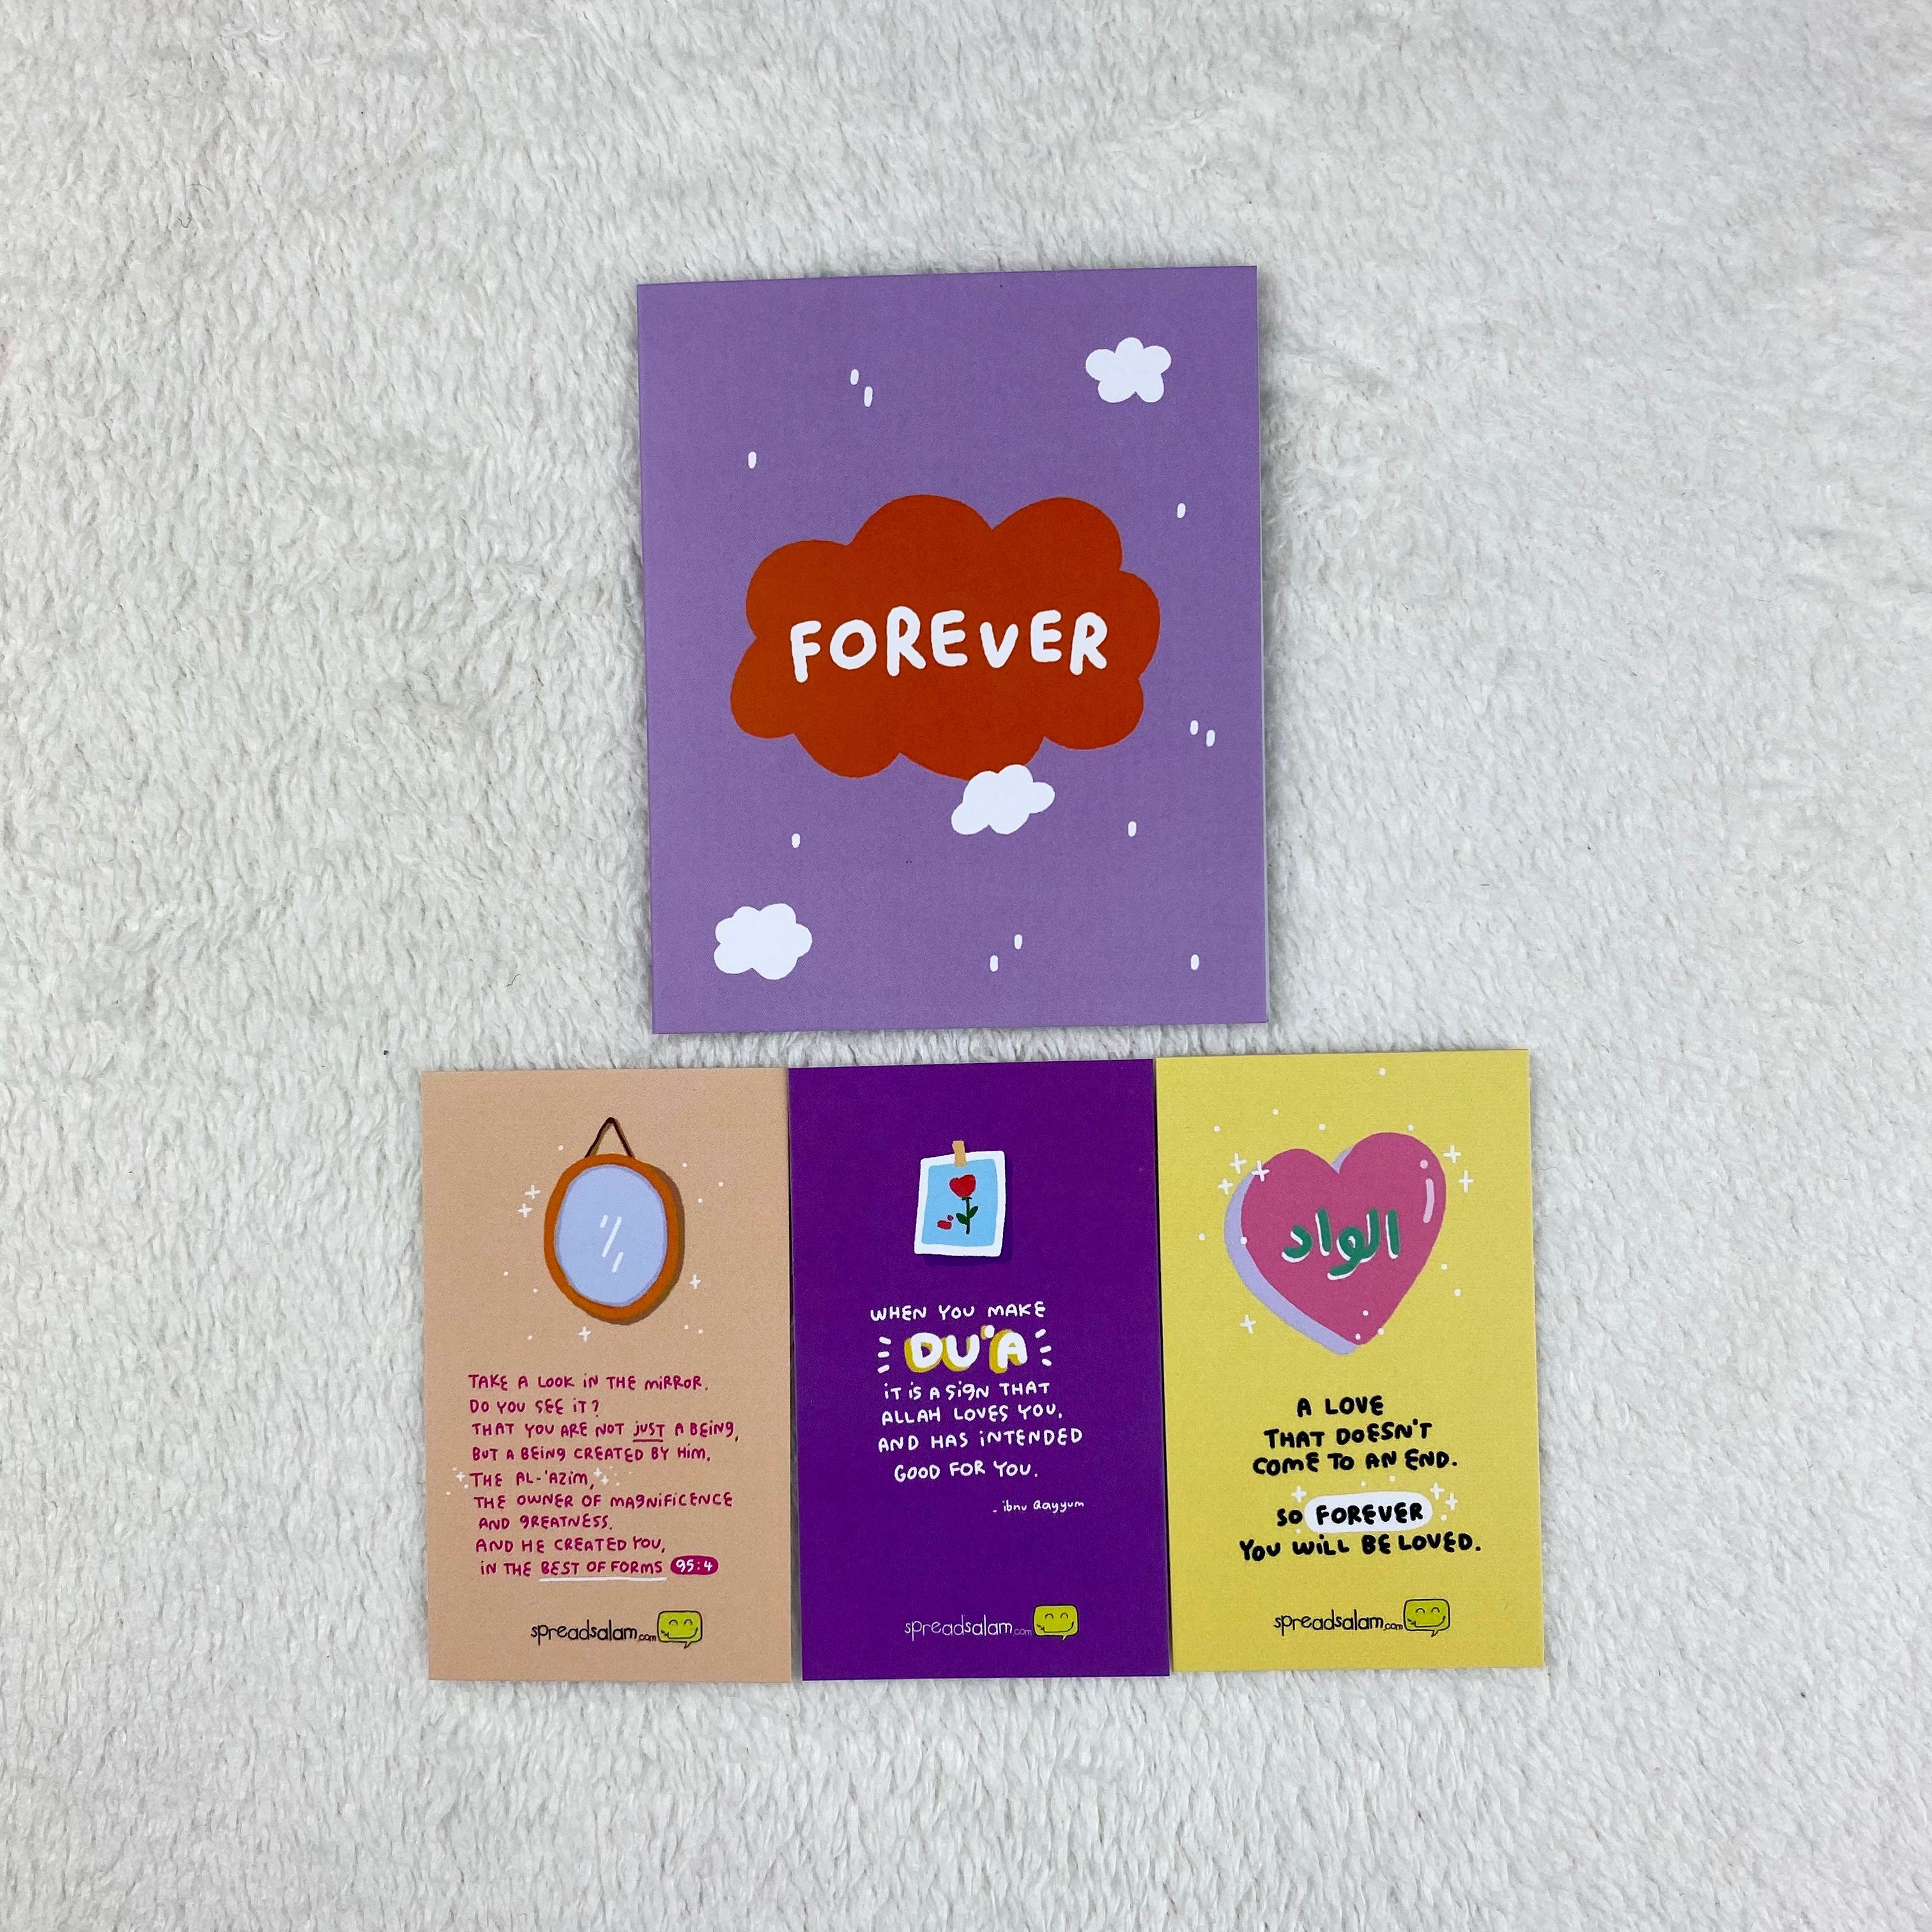 Spread Salam Merchandise Forever Mini Reminder Cards 201832